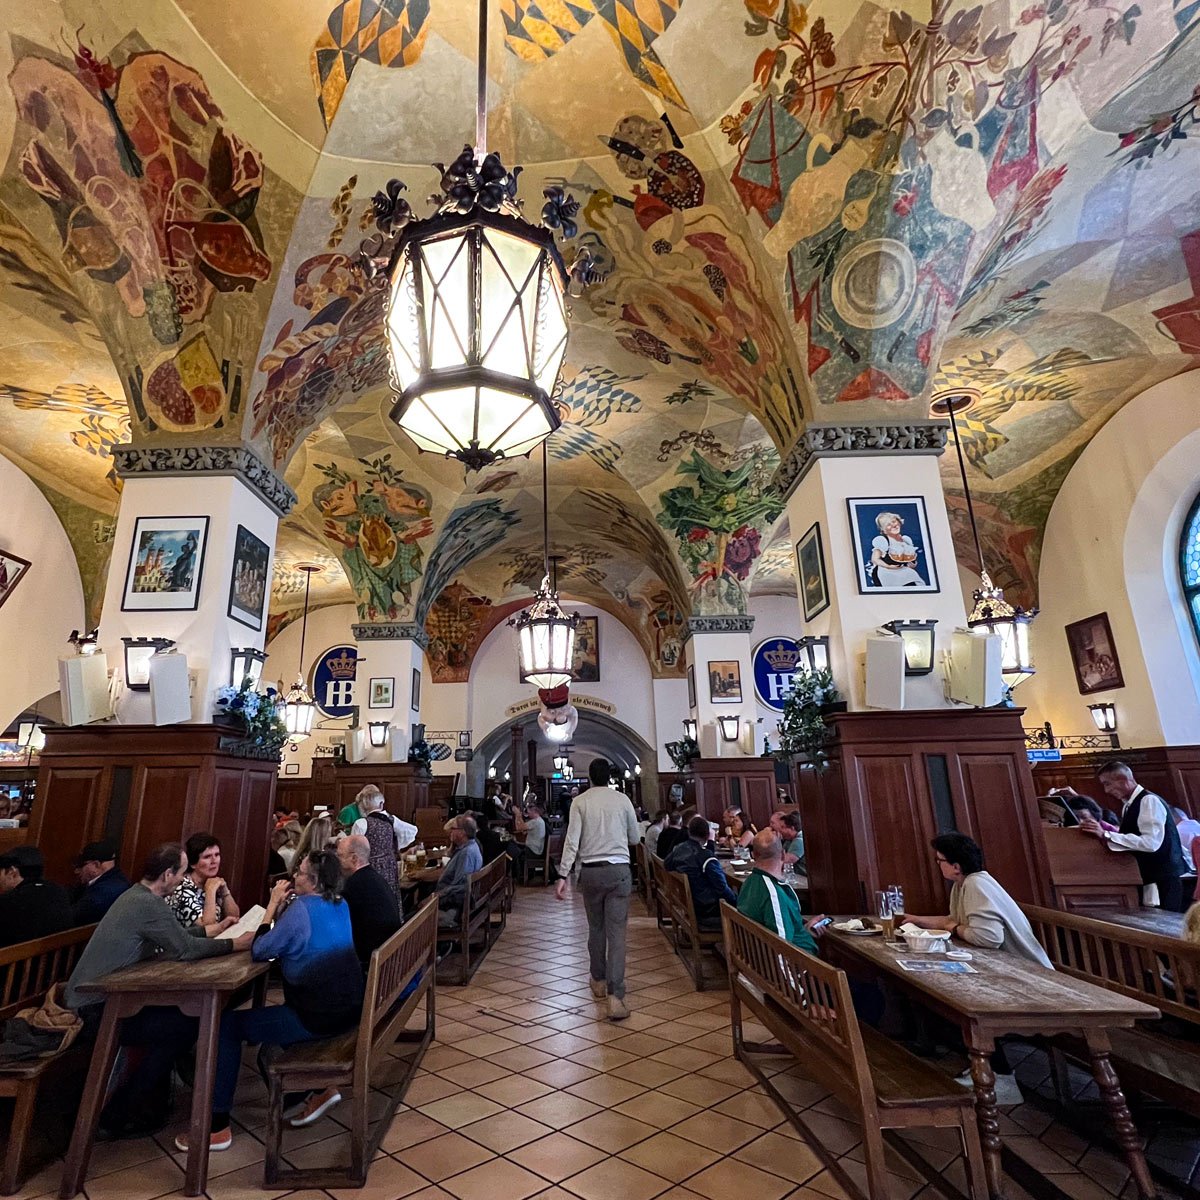 Hofbräuhaus München: Visit the World’s most famous Beer Hall!